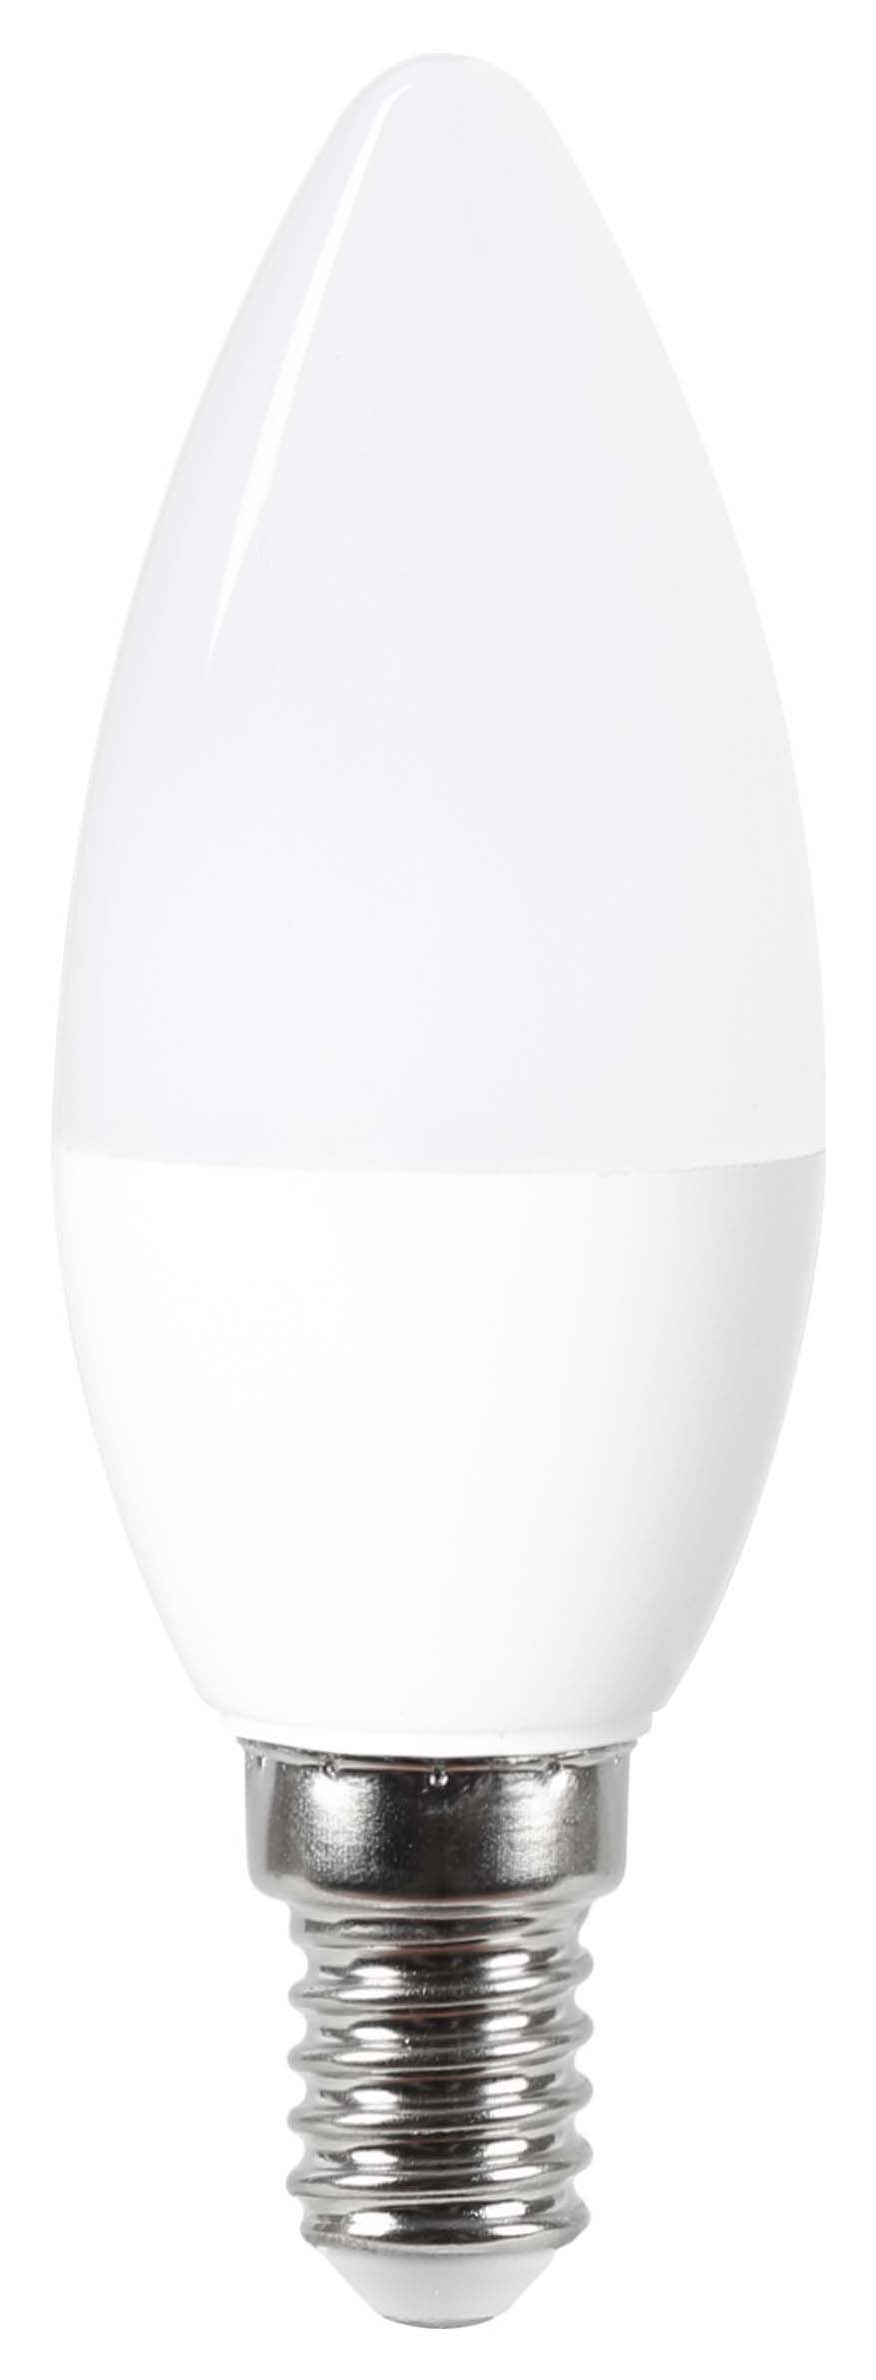 Image of Wickes Non-Dimmable LED E14 Candle 4.9W Warm White Light Bulb - Pack of 4